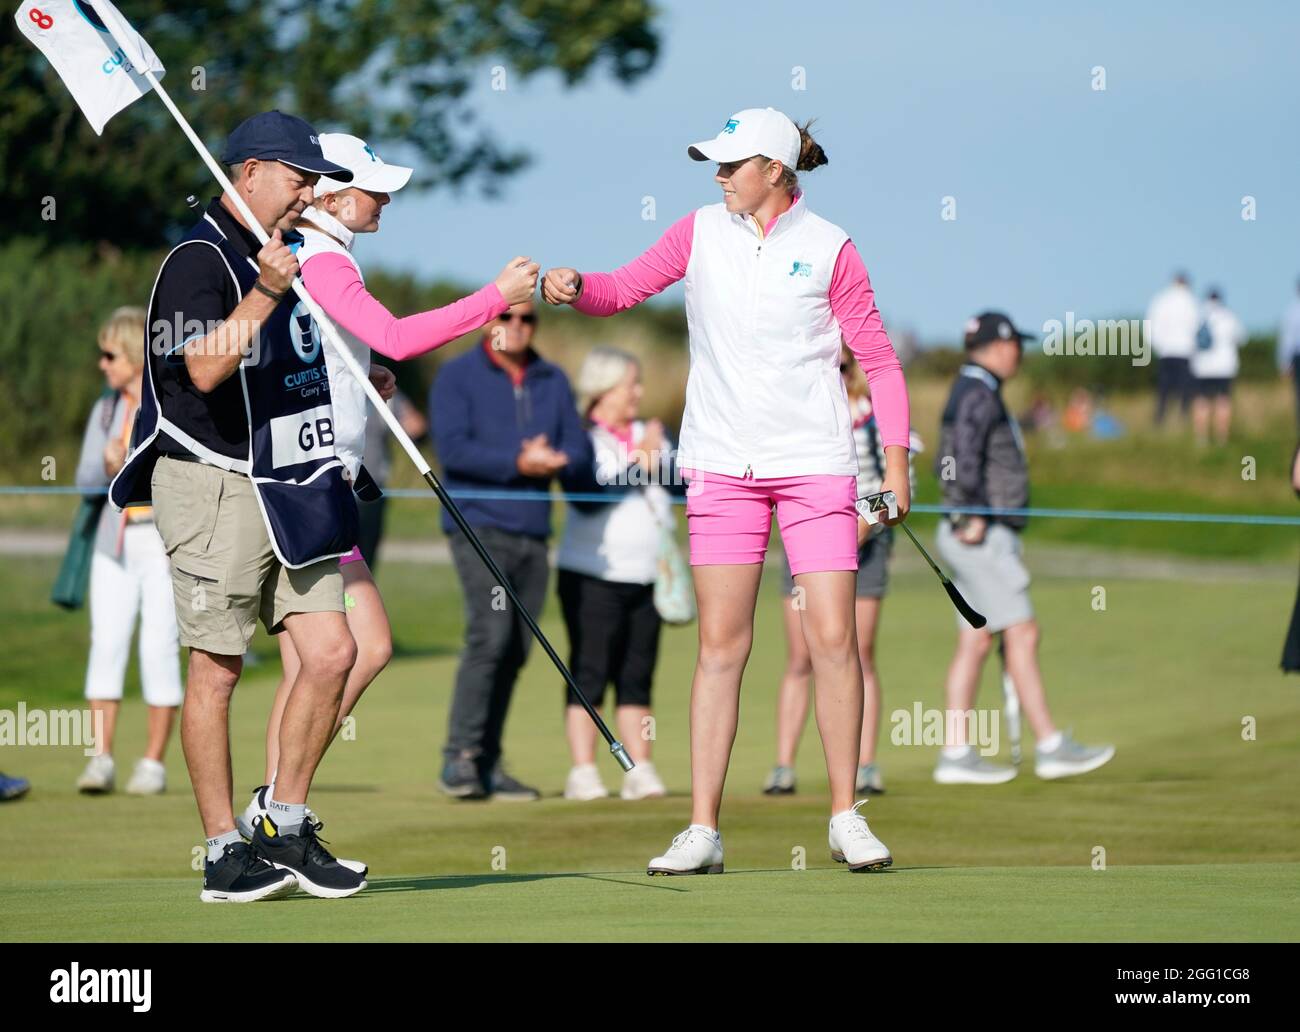 Team GB&I's Louise Duncan fist pumps with Hannah Darling after winning the 8th hole during the 2021 Curtis Cup Day 2 - Morning Foursomes at Conwy Golf Stock Photo